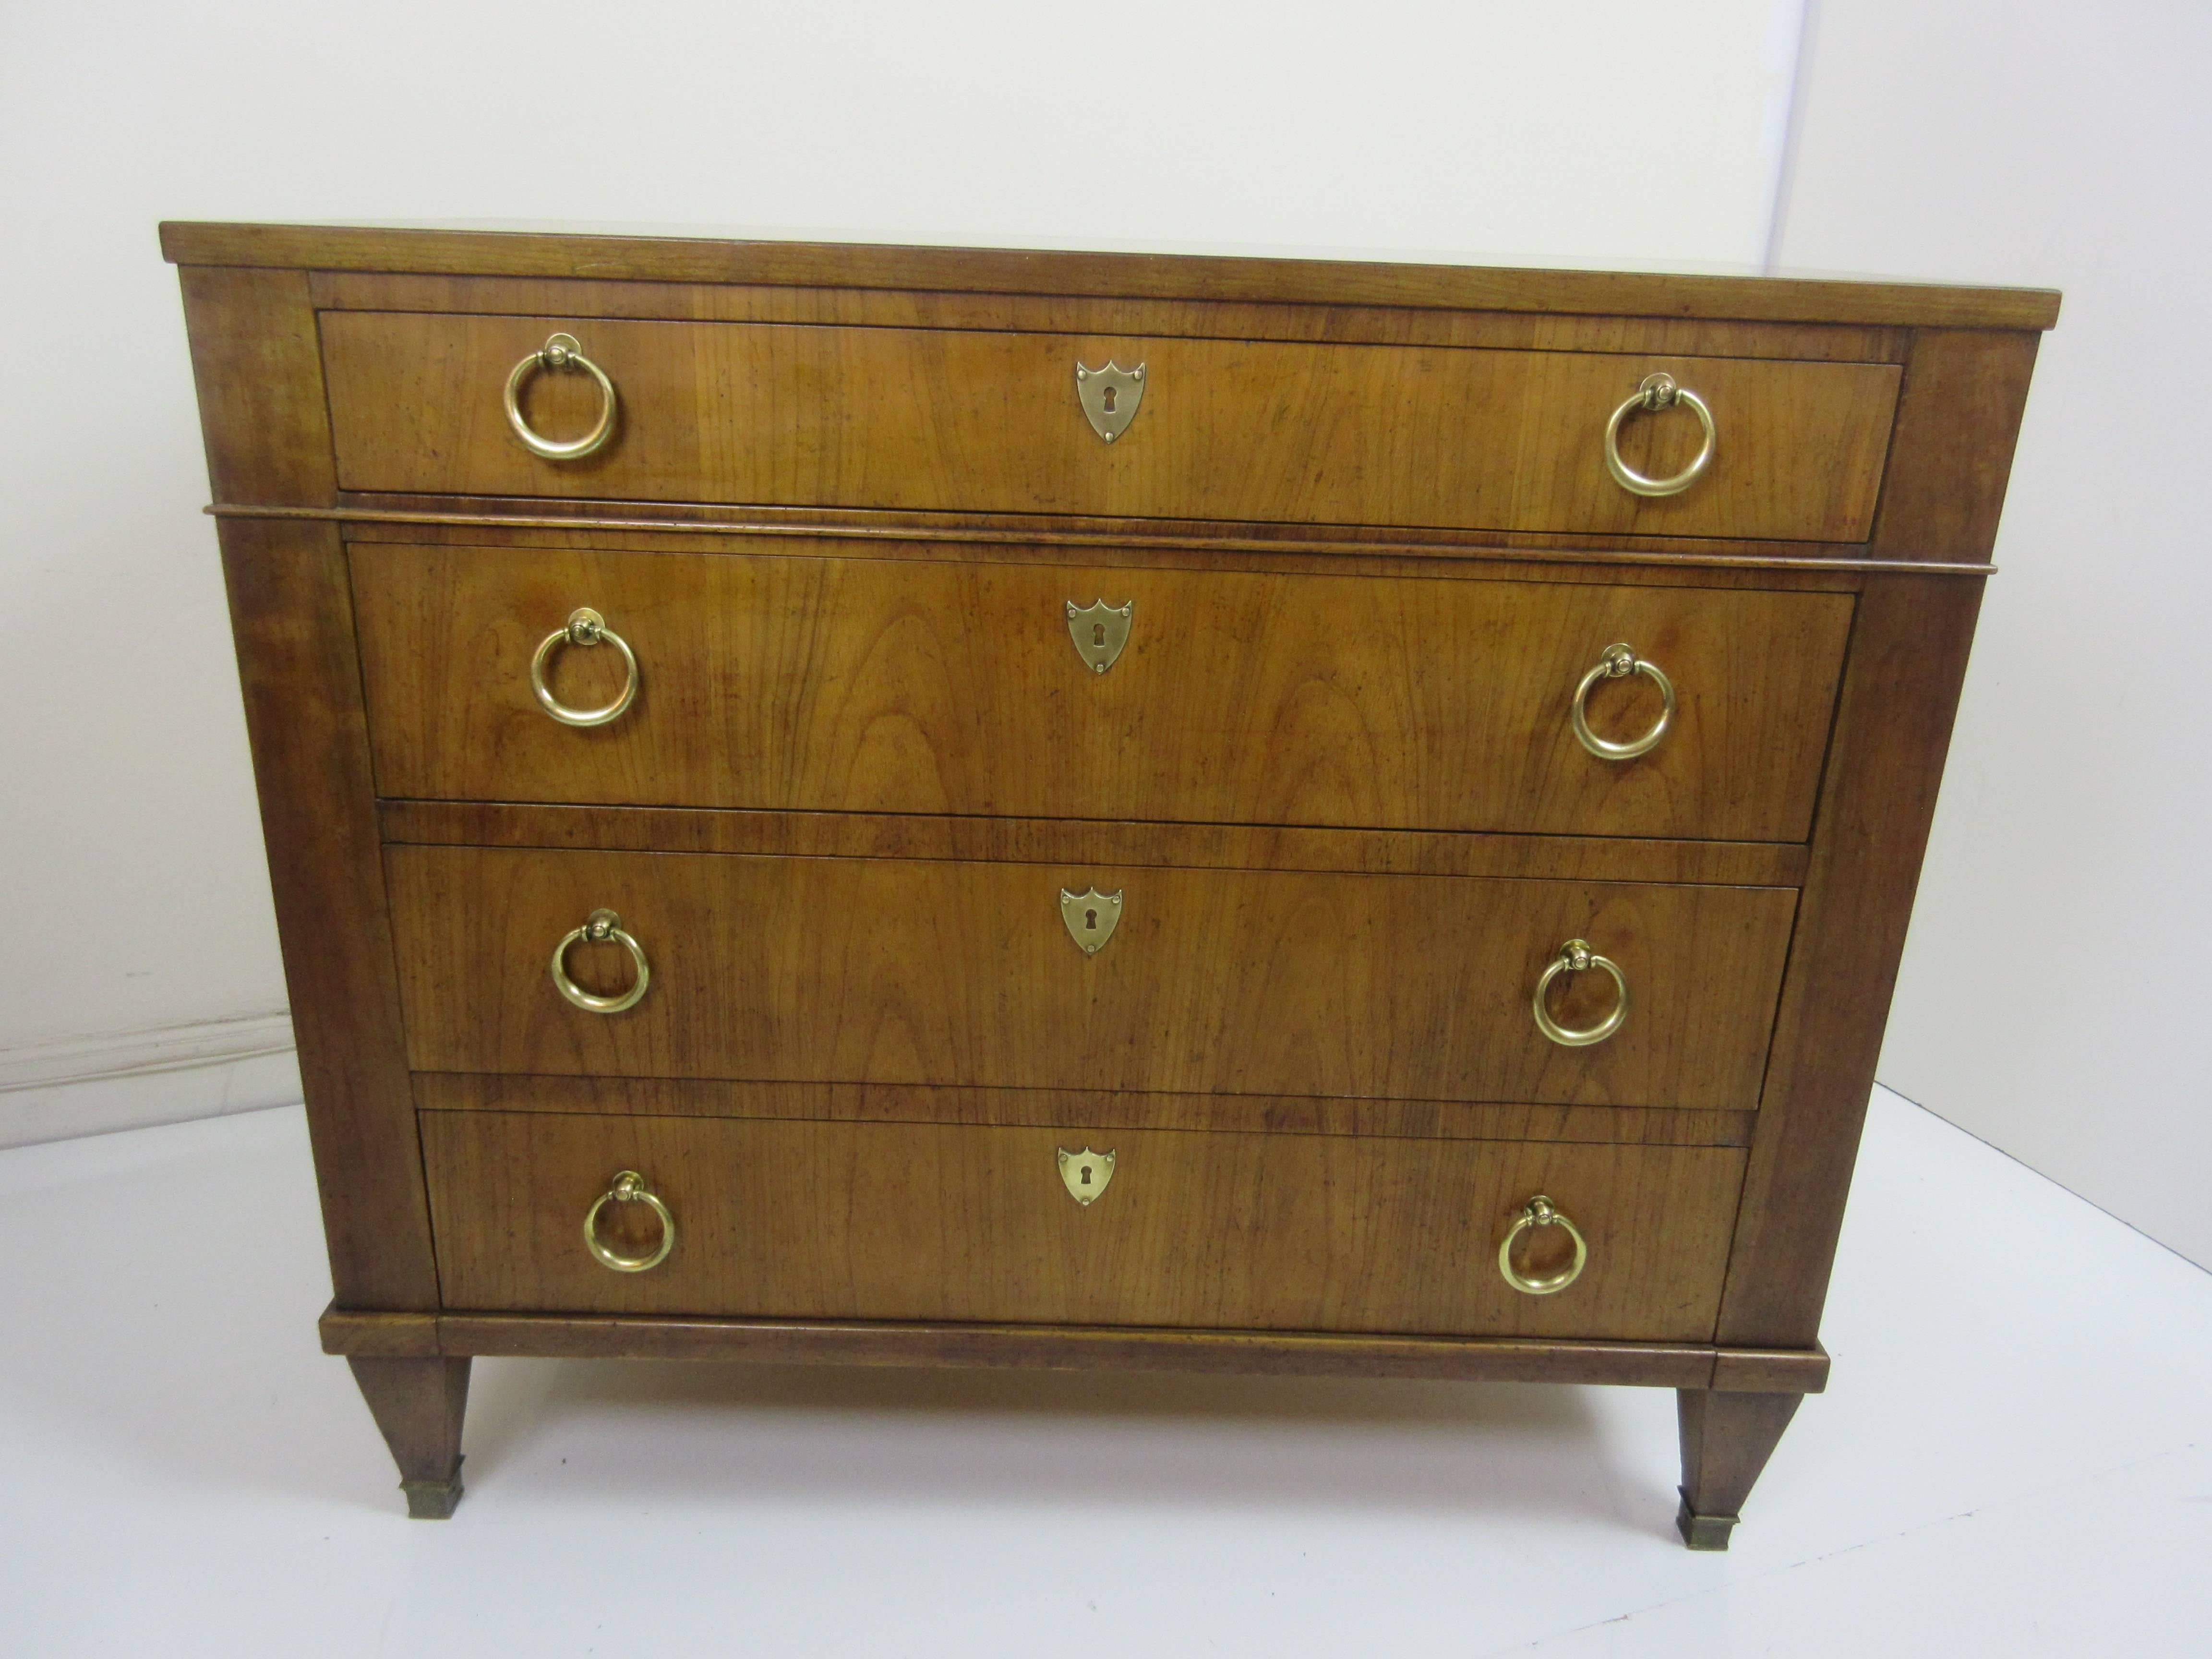 Four-drawer late 1950s neoclassical dresser by Baker Furniture. Solid round brass rings and shield shaped key covers. Very clean original condition! All drawers function beautifully!